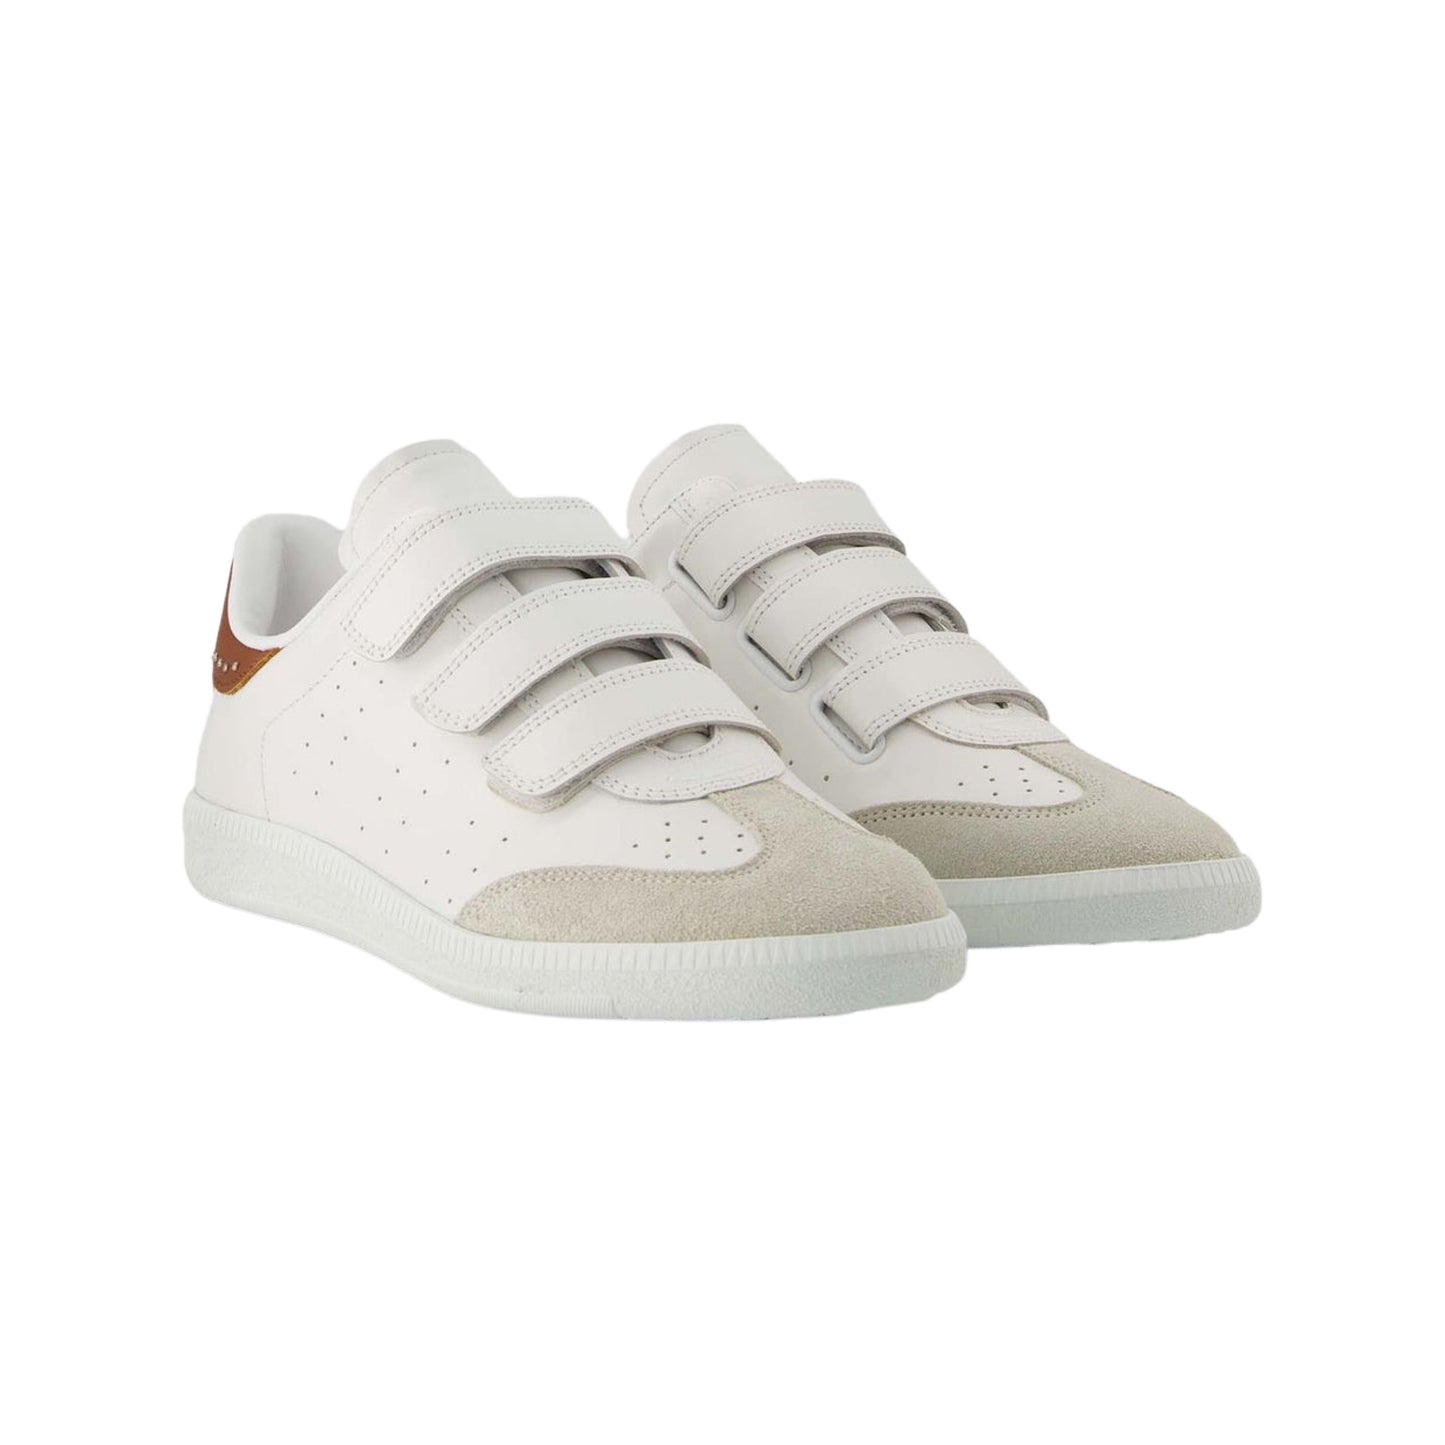 Isabel Marant Beth Sneakers (Size 39)